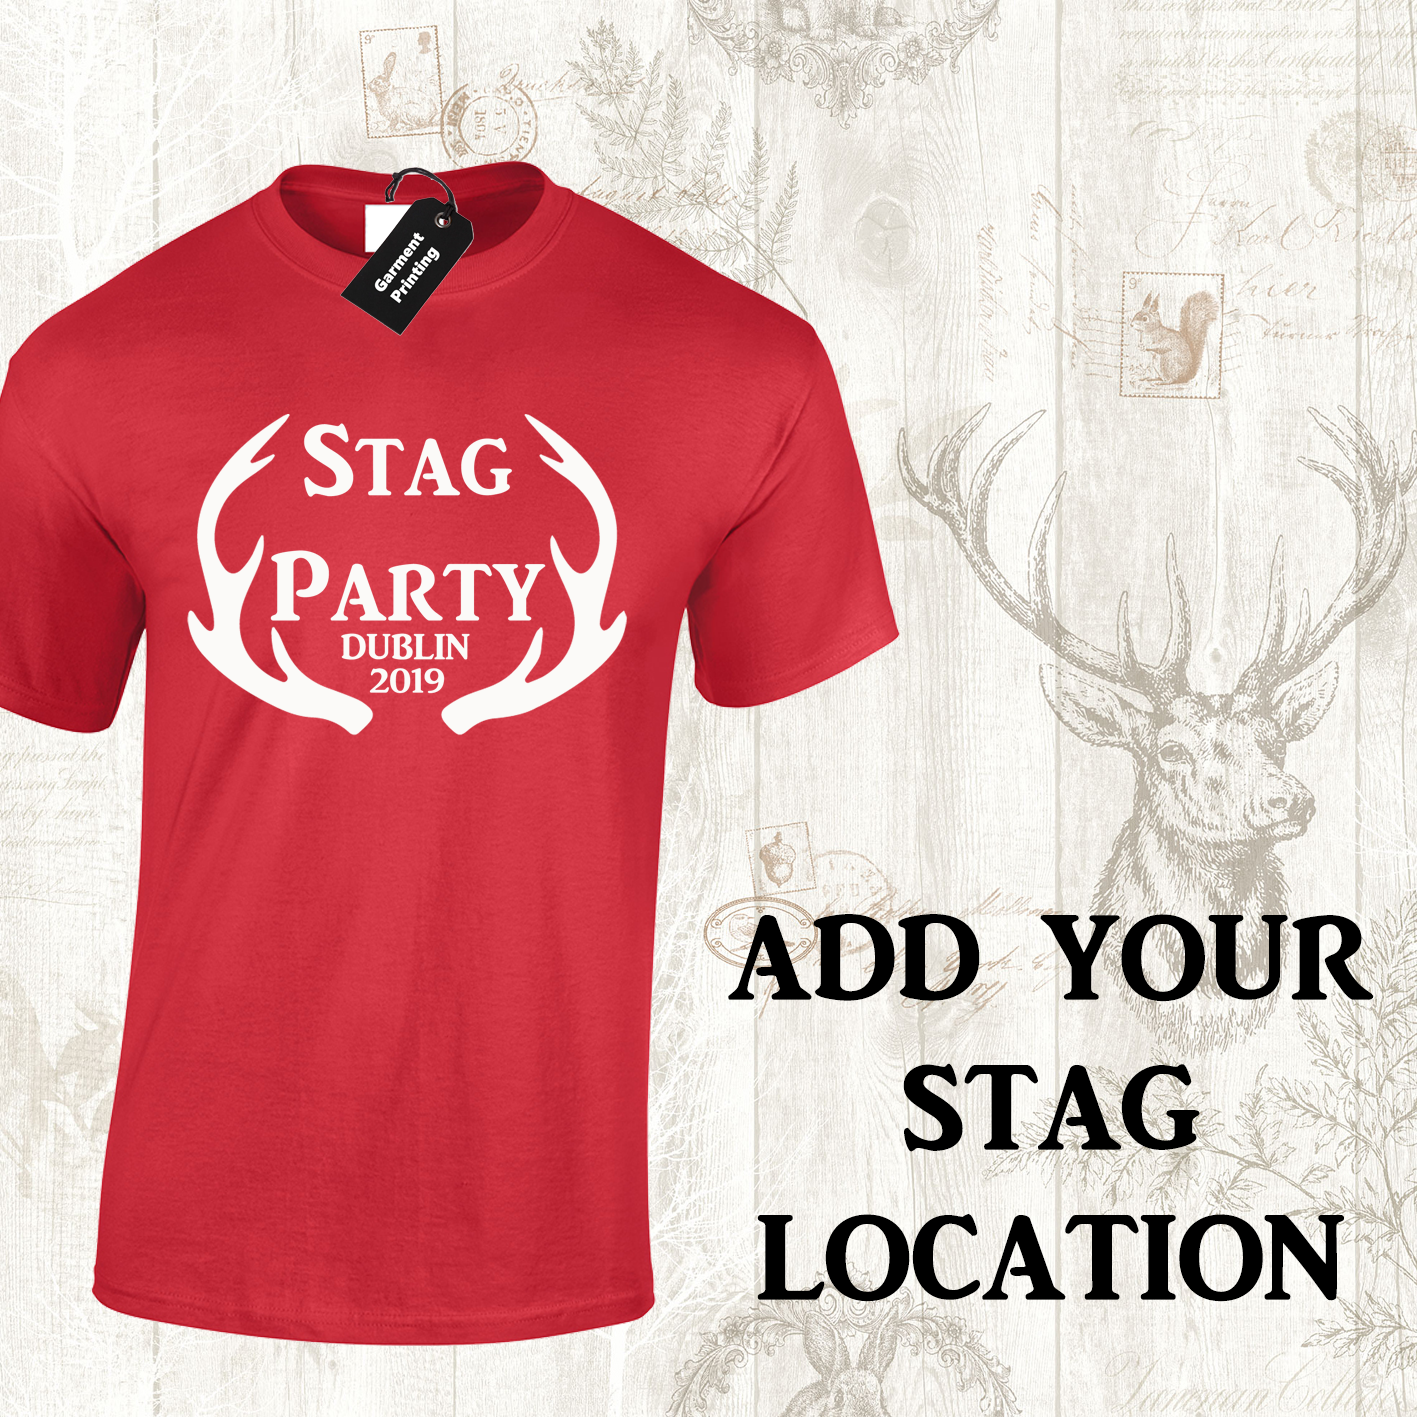 STAG DO T-SHIRTS FUNNY MENS STAG PARTY PERSONALISED TOPS CUSTOM JOKE FUN  (D-8) | eBay